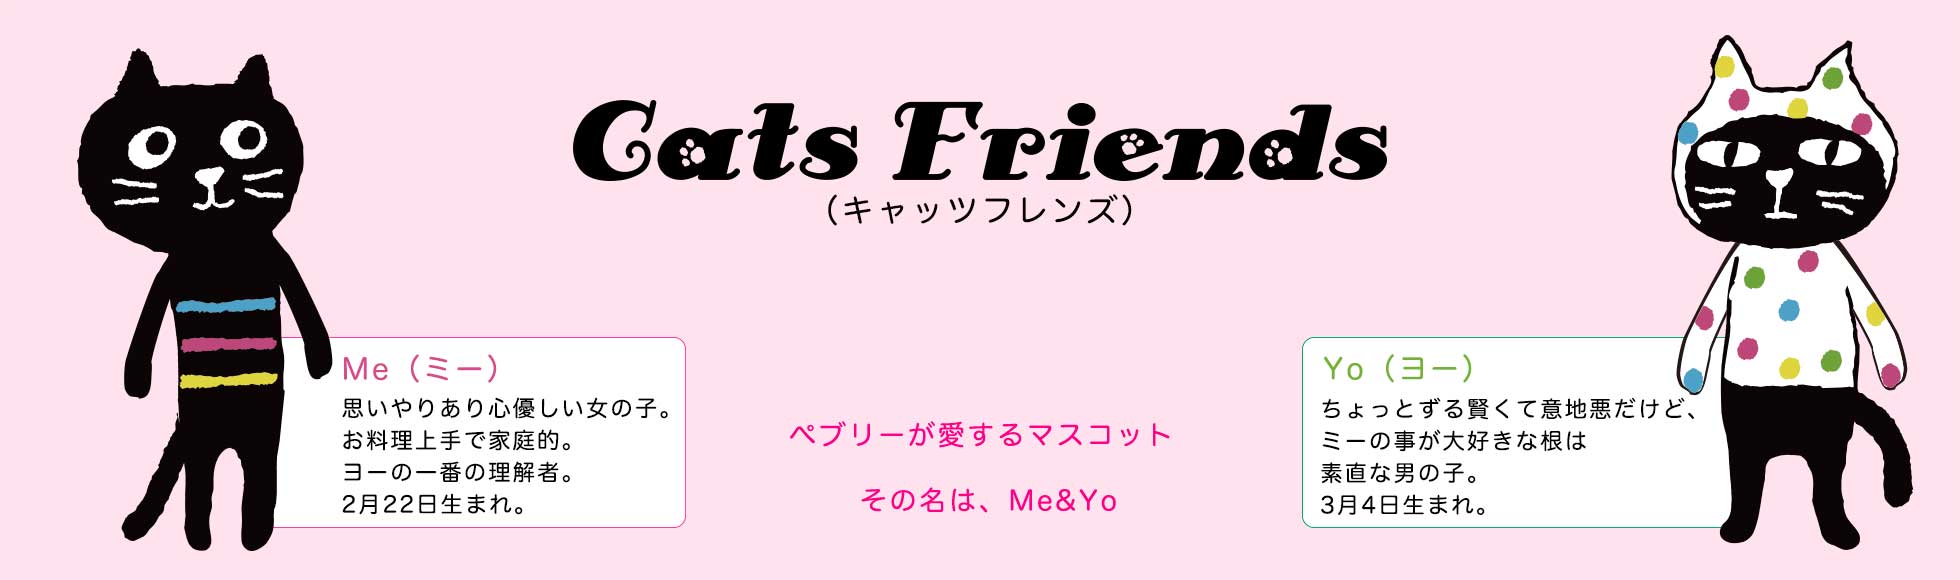 CatsFriends   Pebbly公式通販サイト